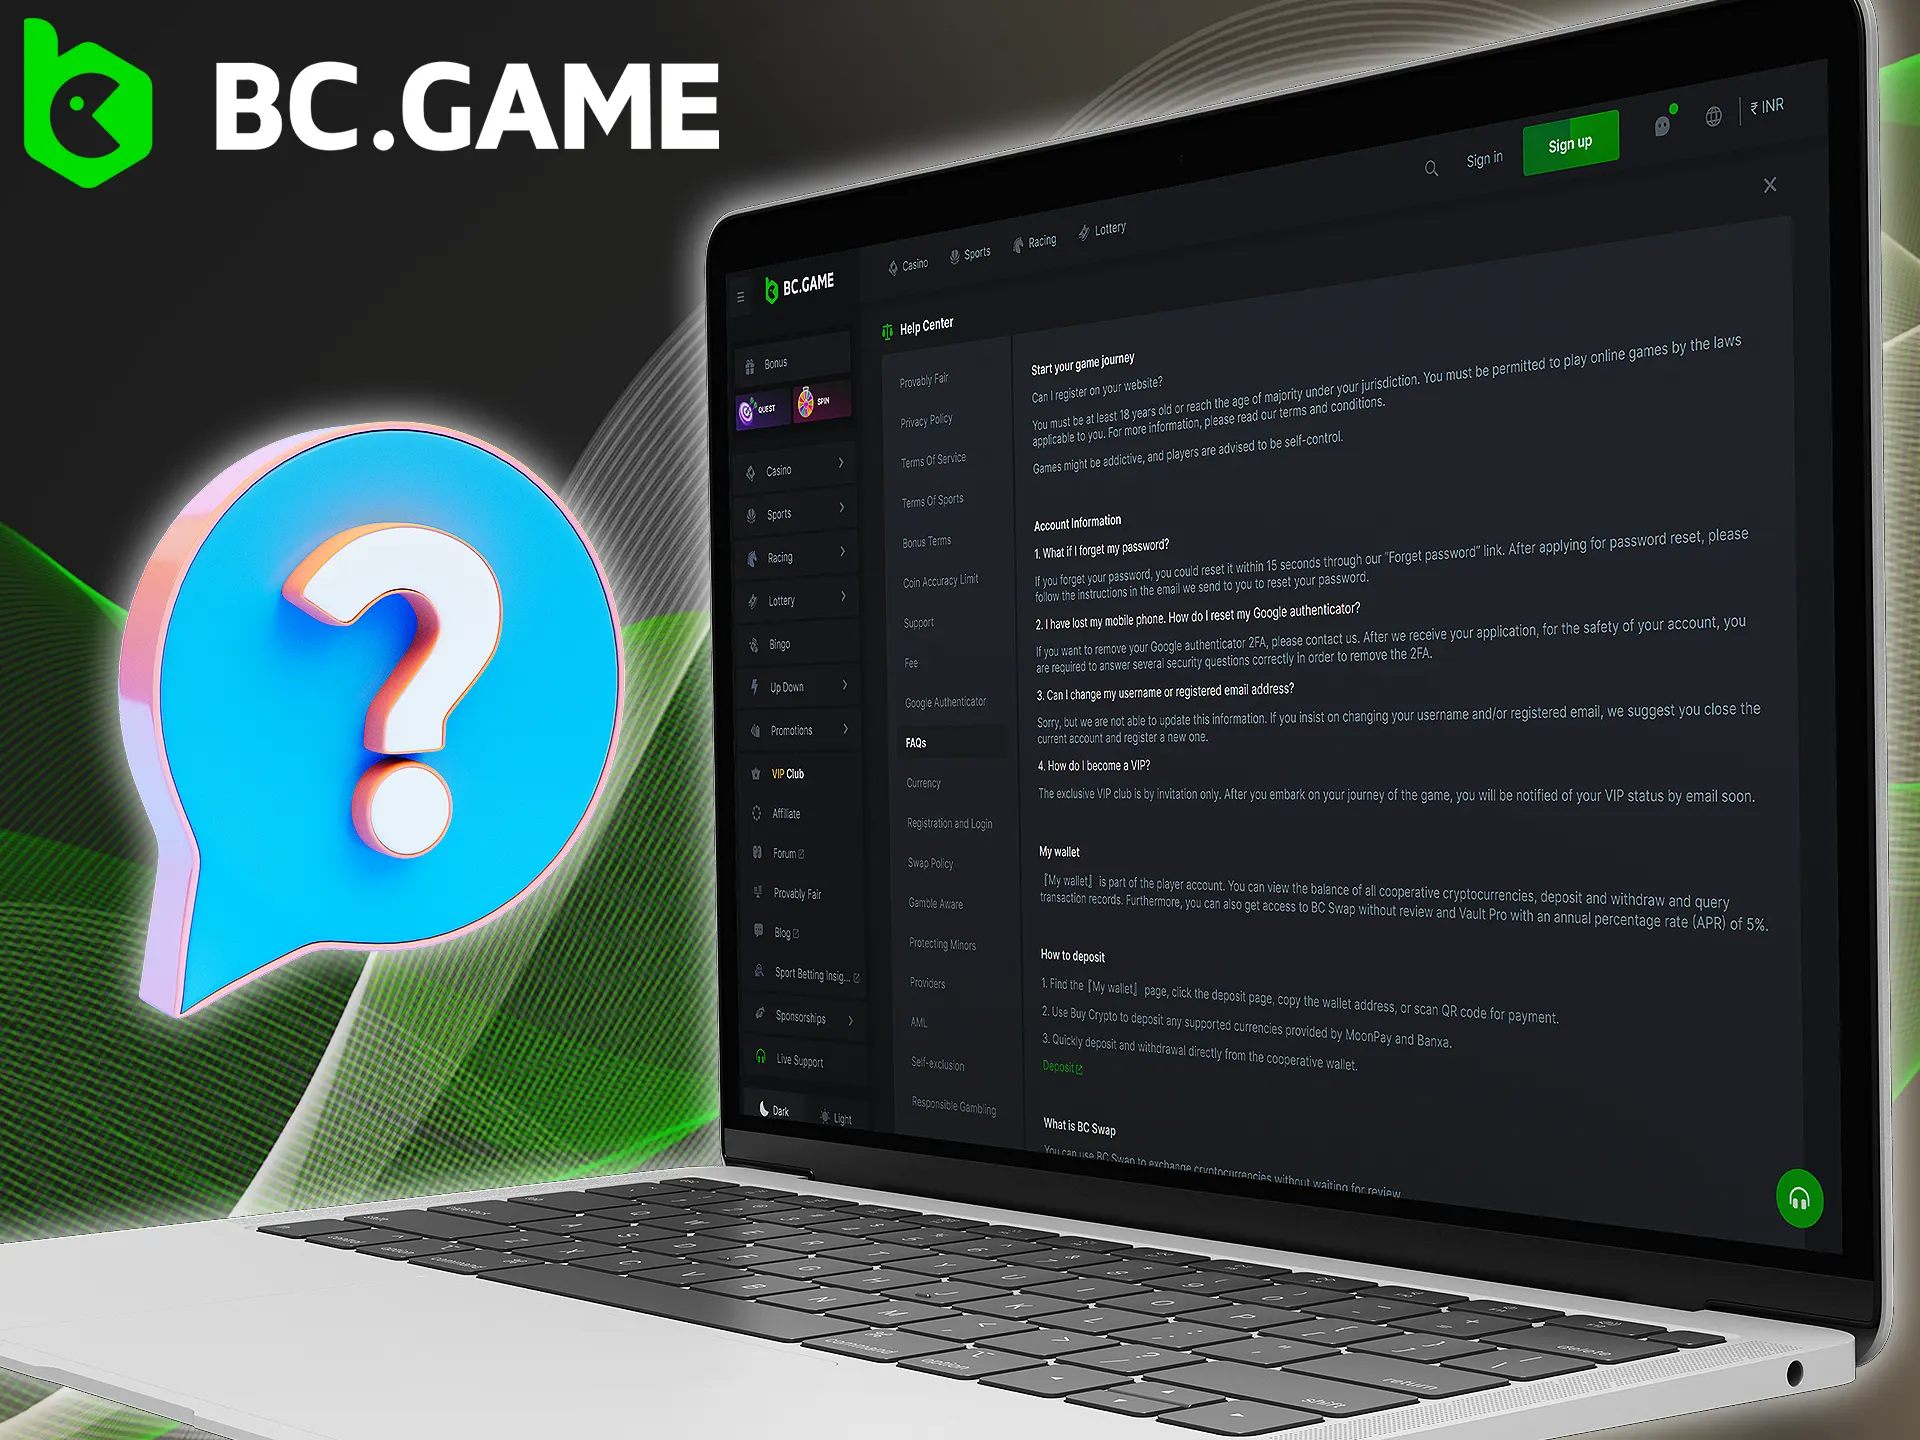 BC Game's FAQ section will help you understand the specifics of using the platform.